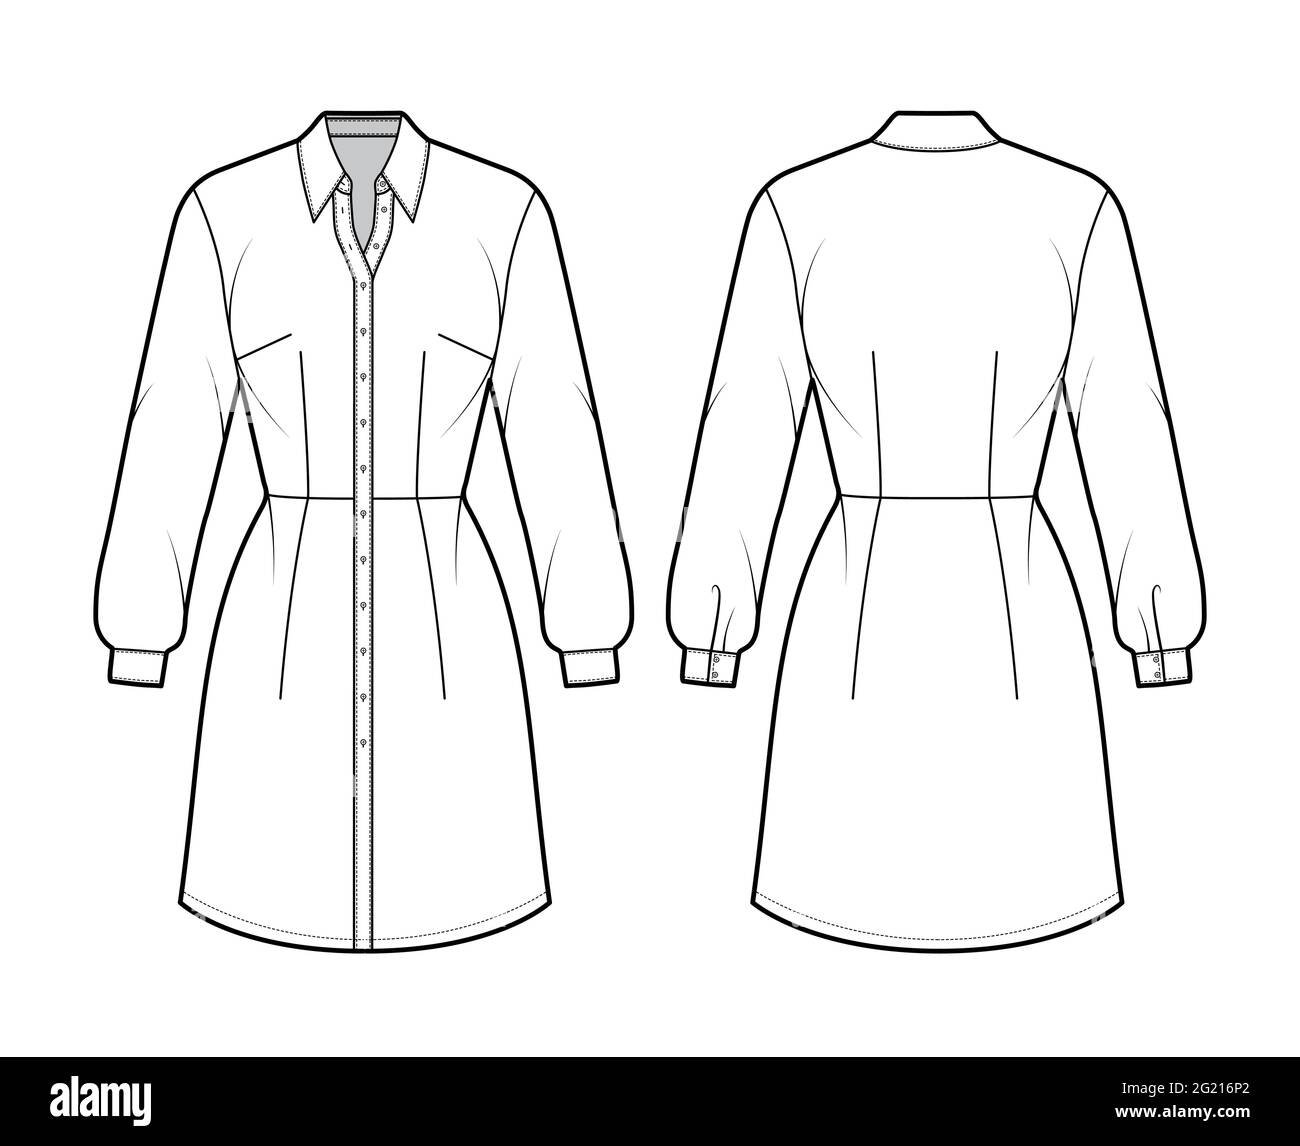 Dress shirt technical fashion illustration with long sleeves, fitted, knee length pencil skirt, classic collar, button closure. Flat apparel front, back, white color style. Women men unisex CAD mockup Stock Vector